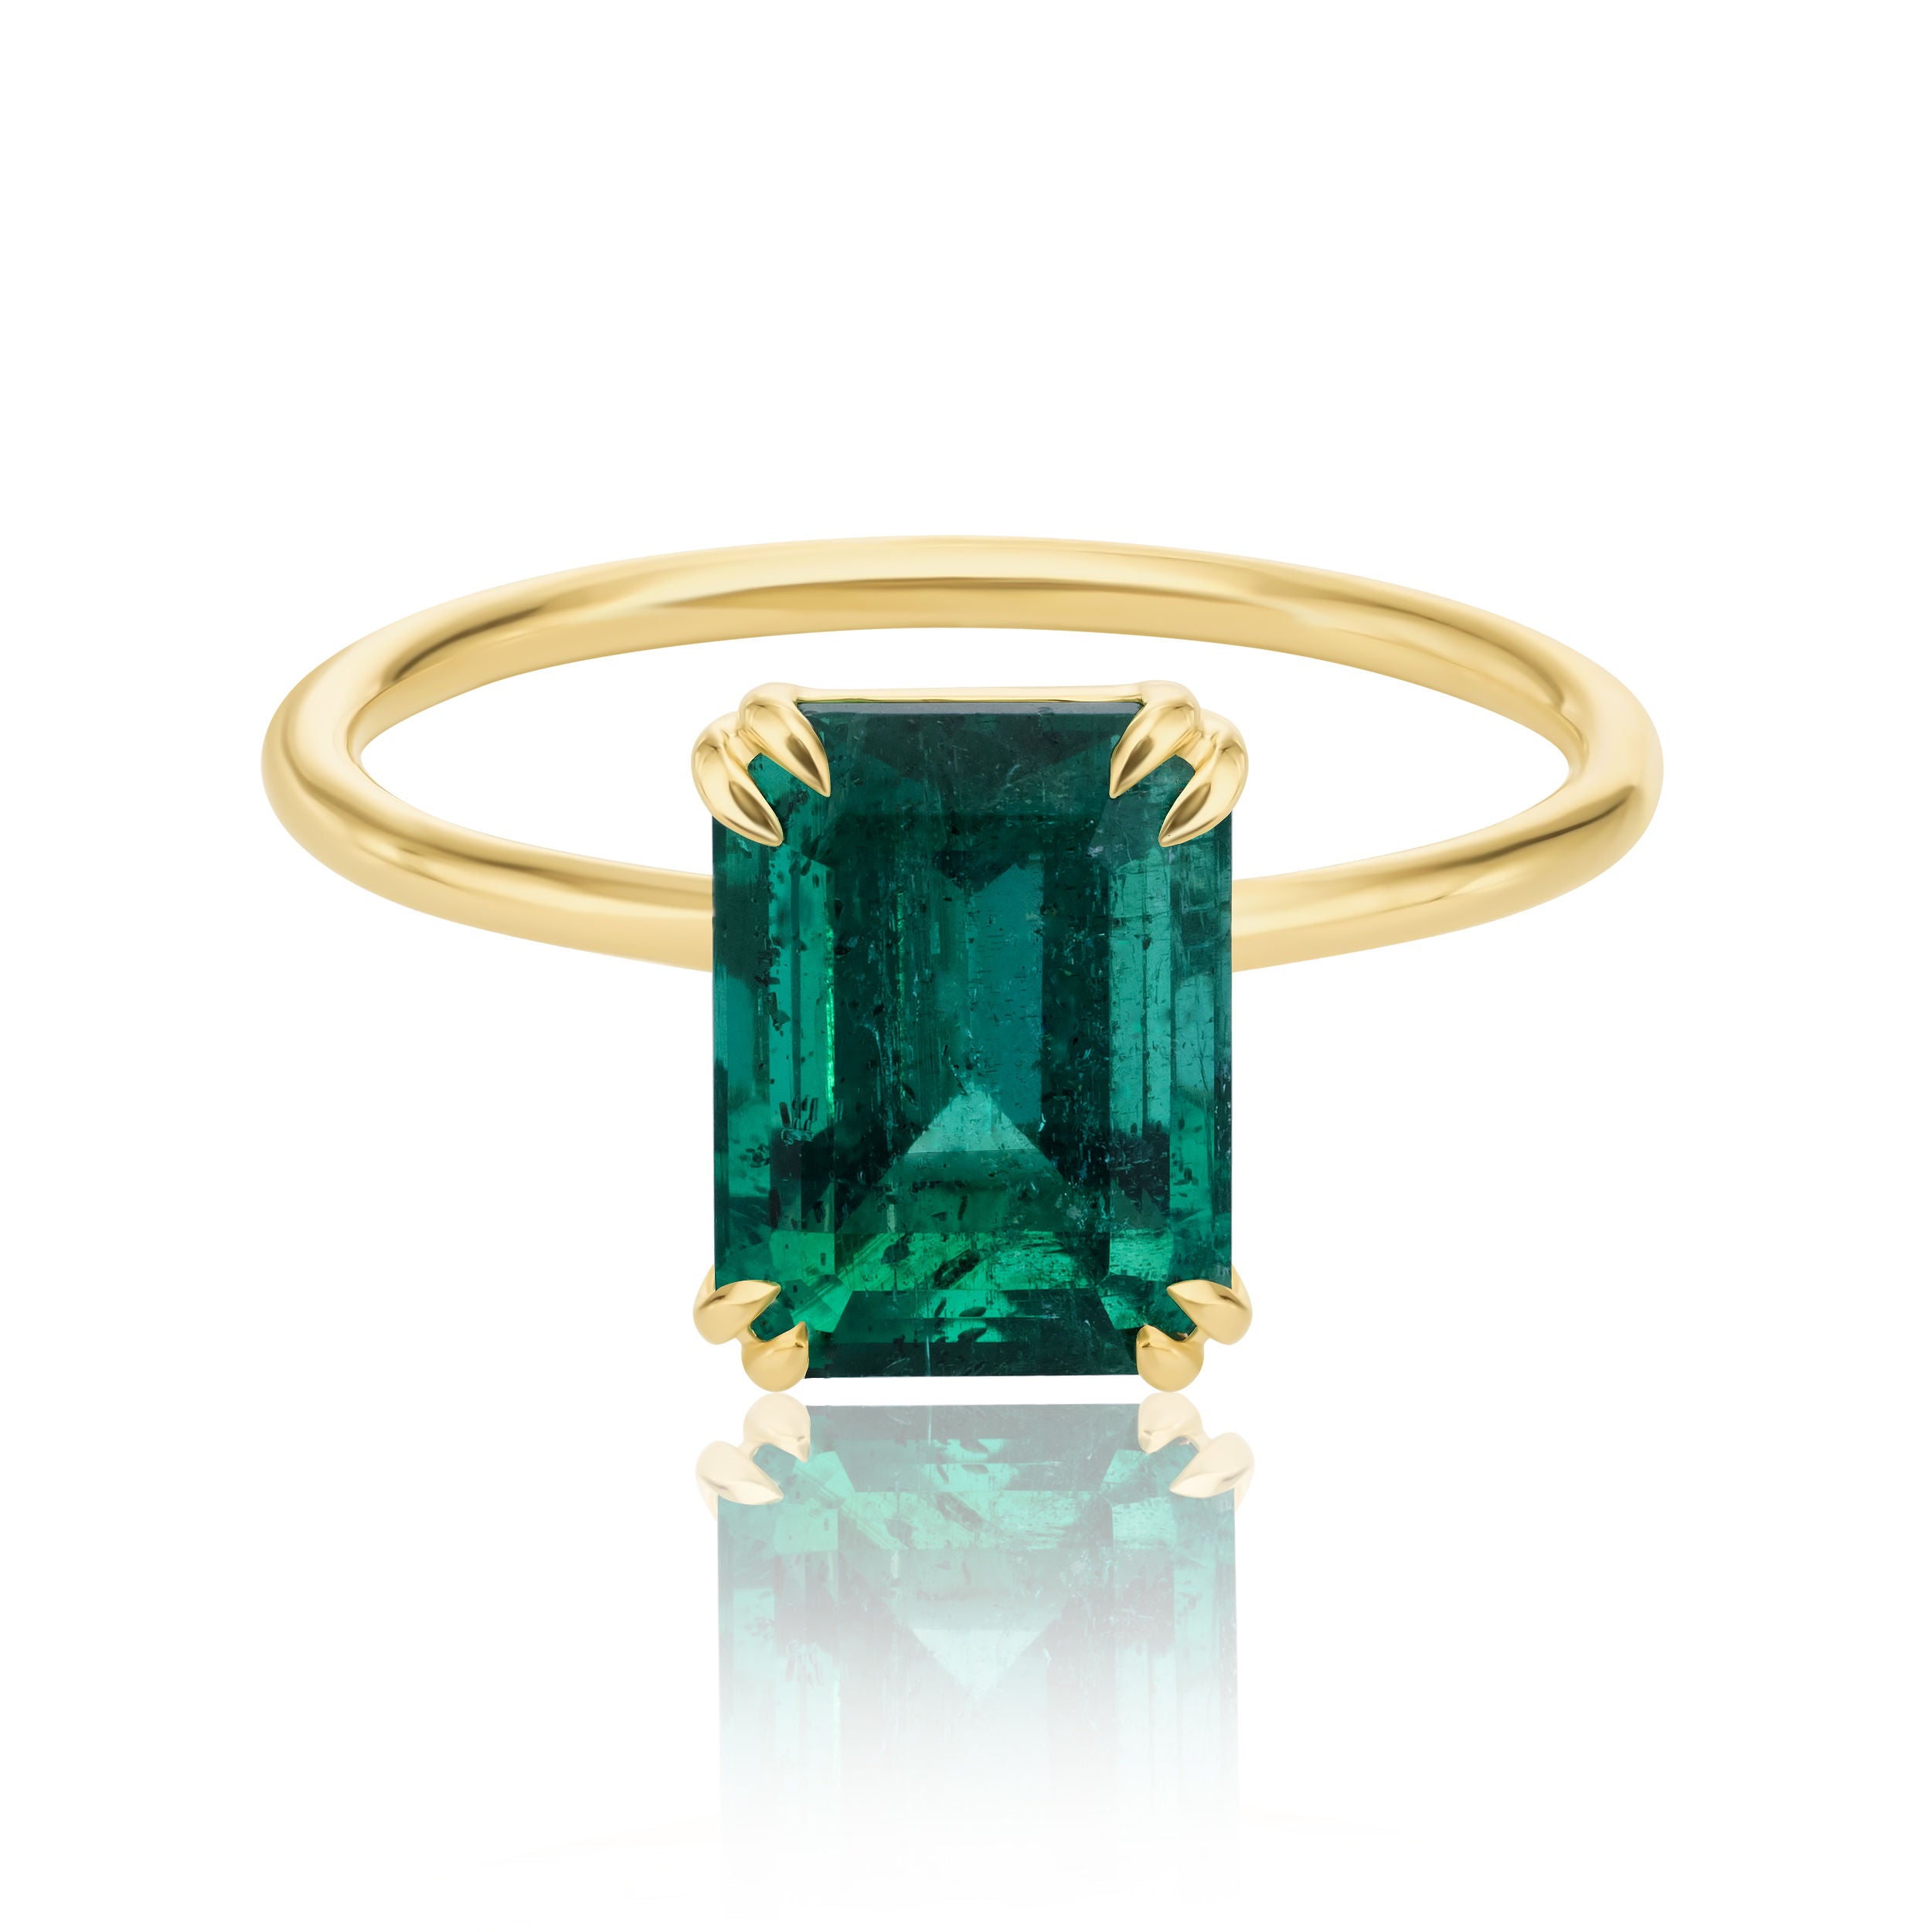 Emerald Solitaire Ring - 2.85ct TW